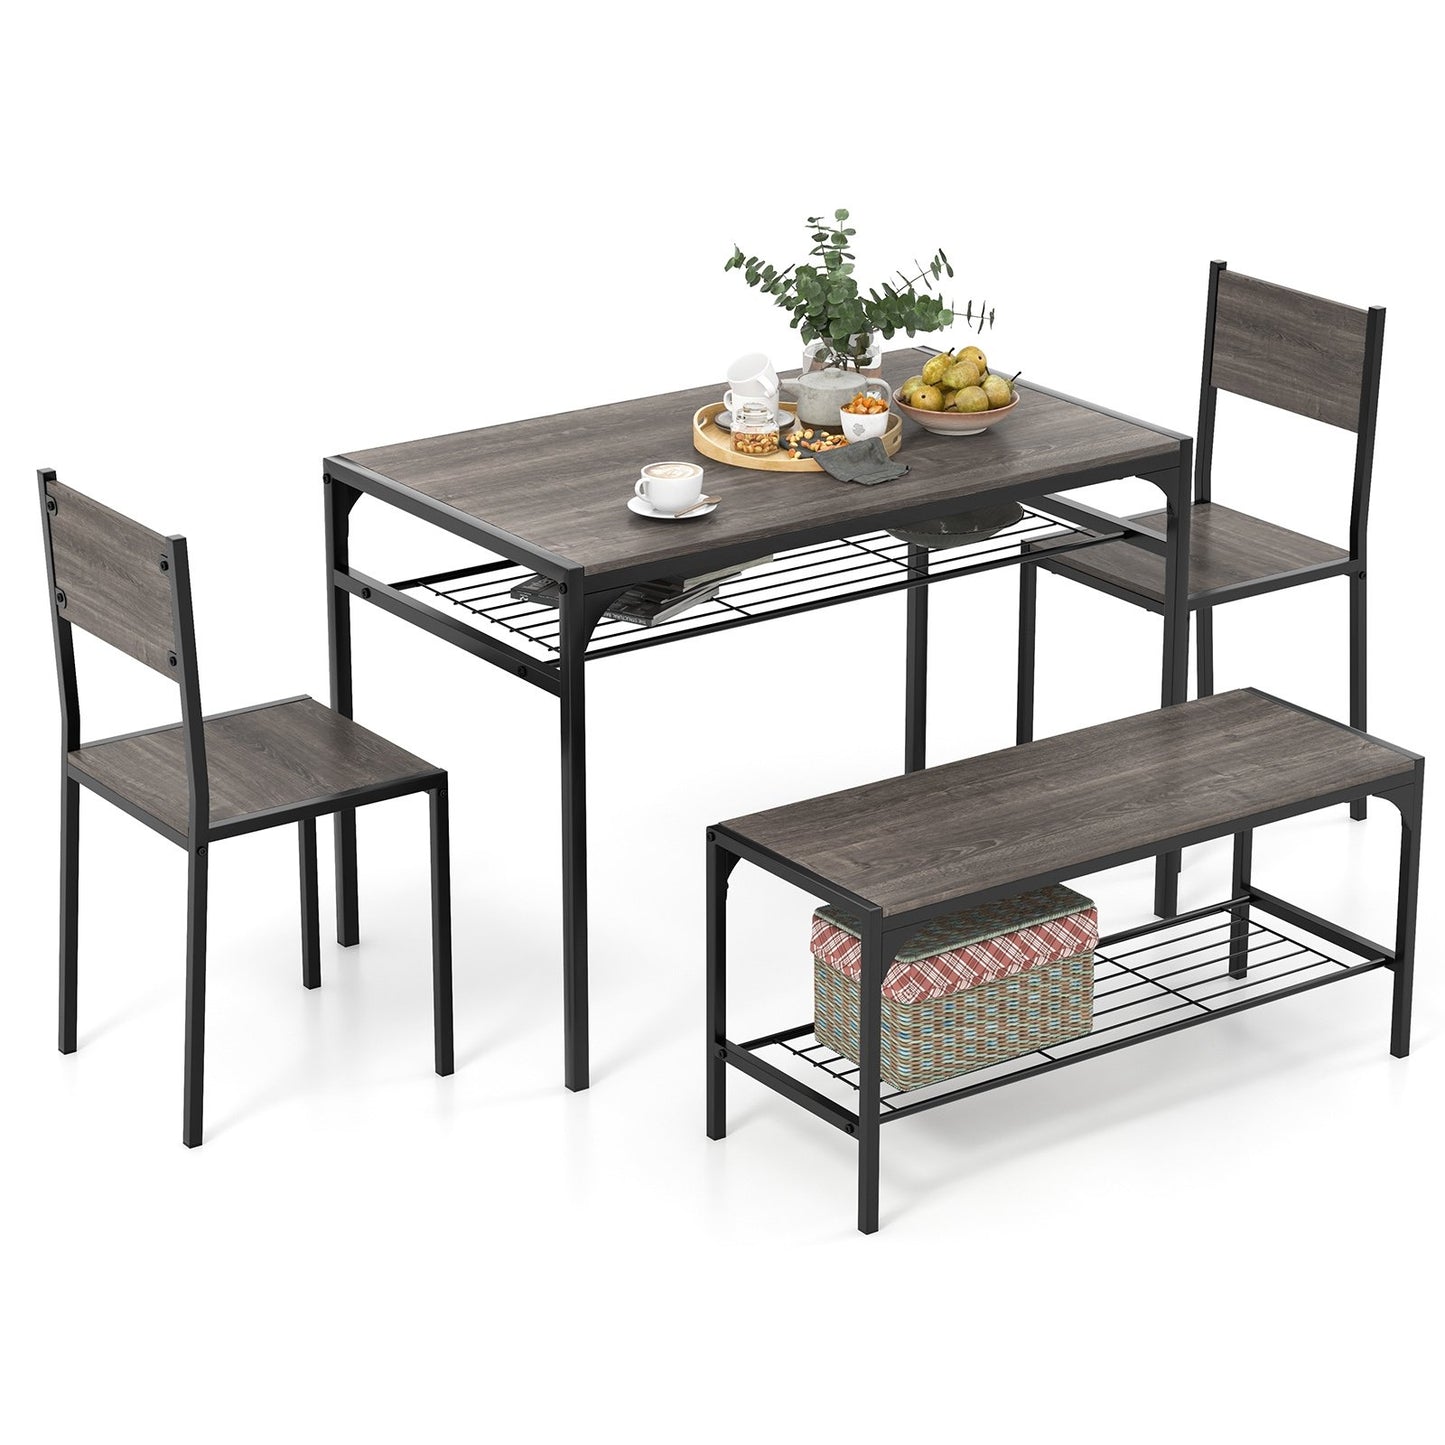 Industrial Style Rectangular Kitchen Table with Bench and Chairs, Gray